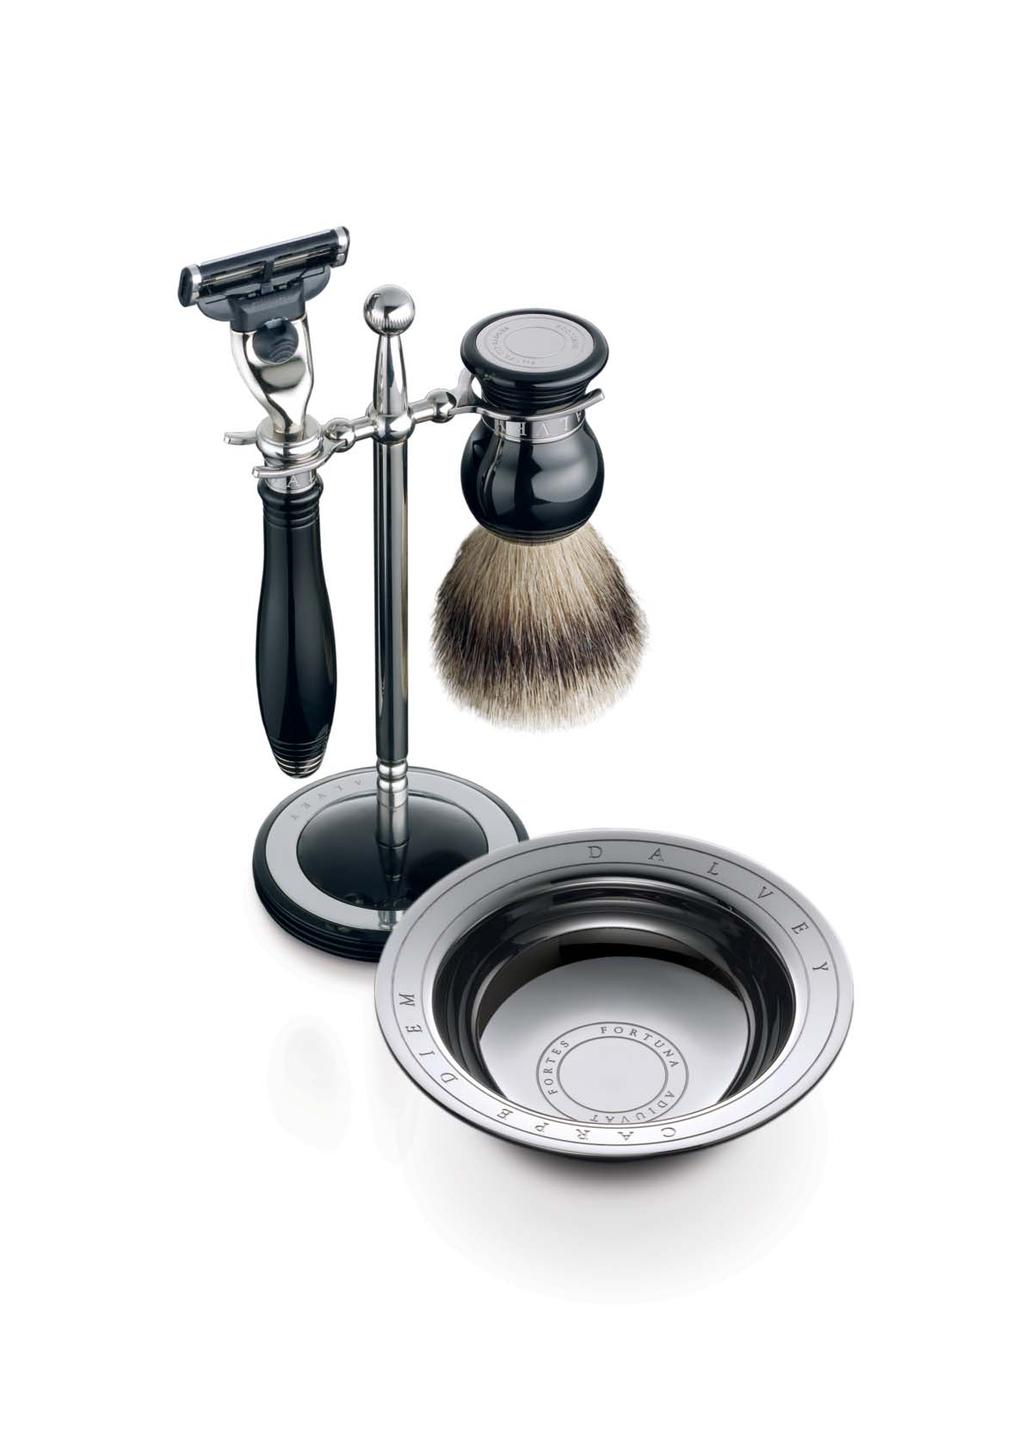 CLASSIC SHAVING SET & STAND The Razor and Super Badger Brush hang from this elegant stainless steel and precious